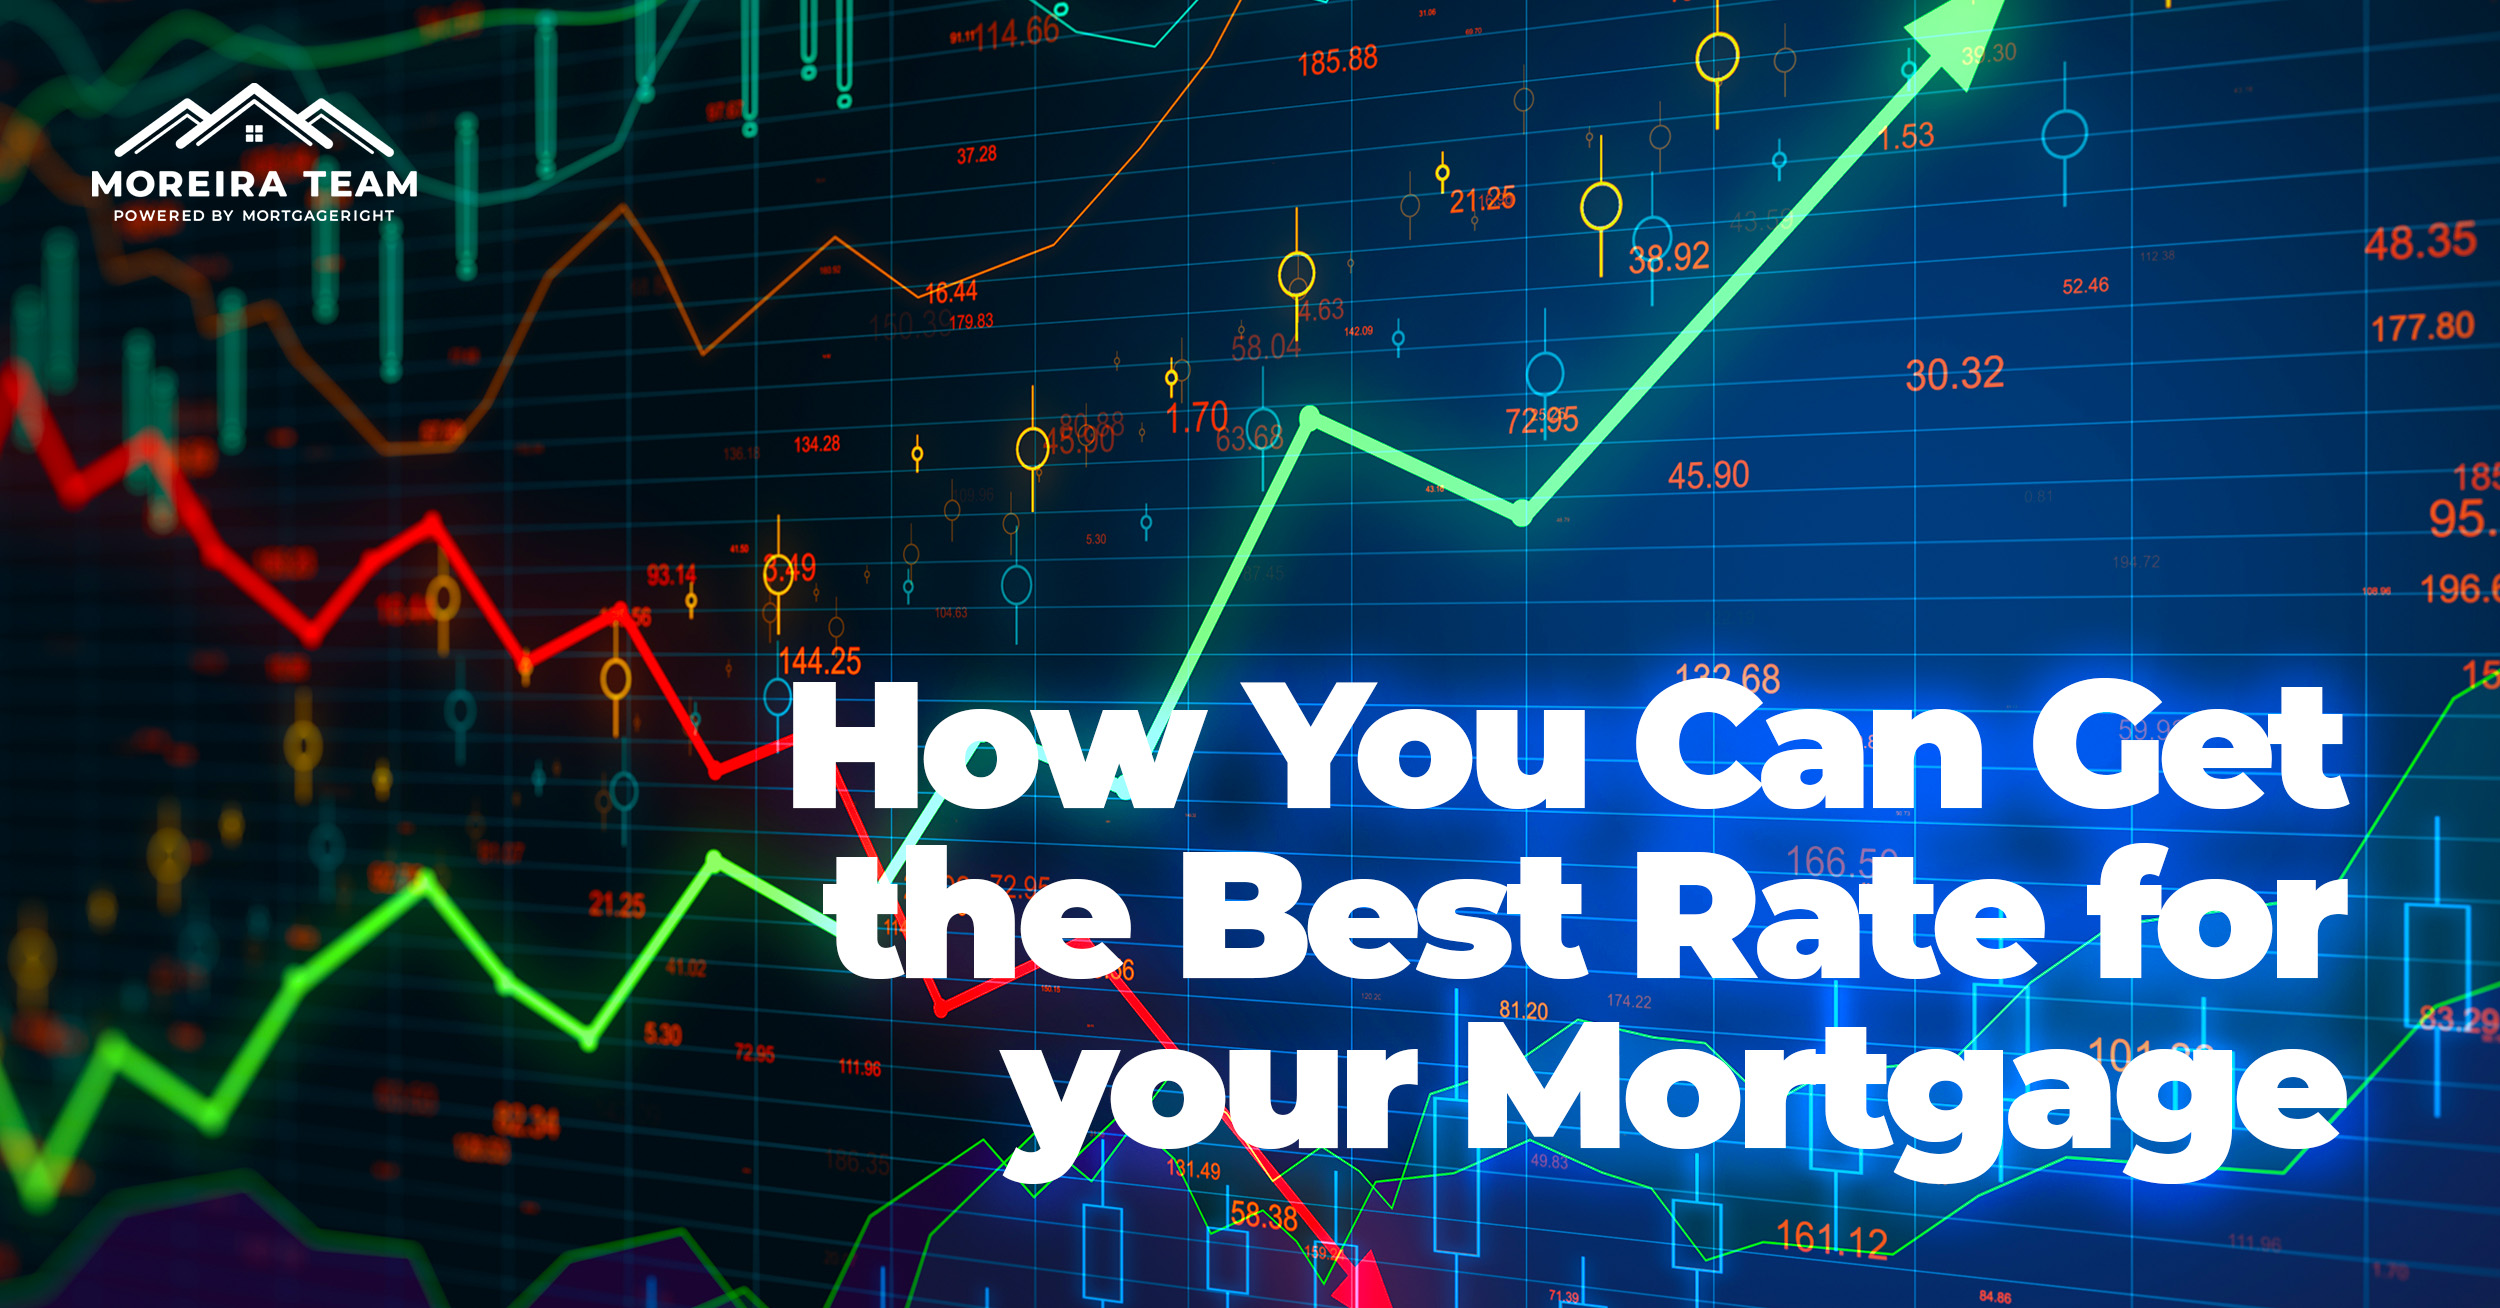 A Guide To Mortgage Rates: How You Can Get the Best Rate for your Mortgage